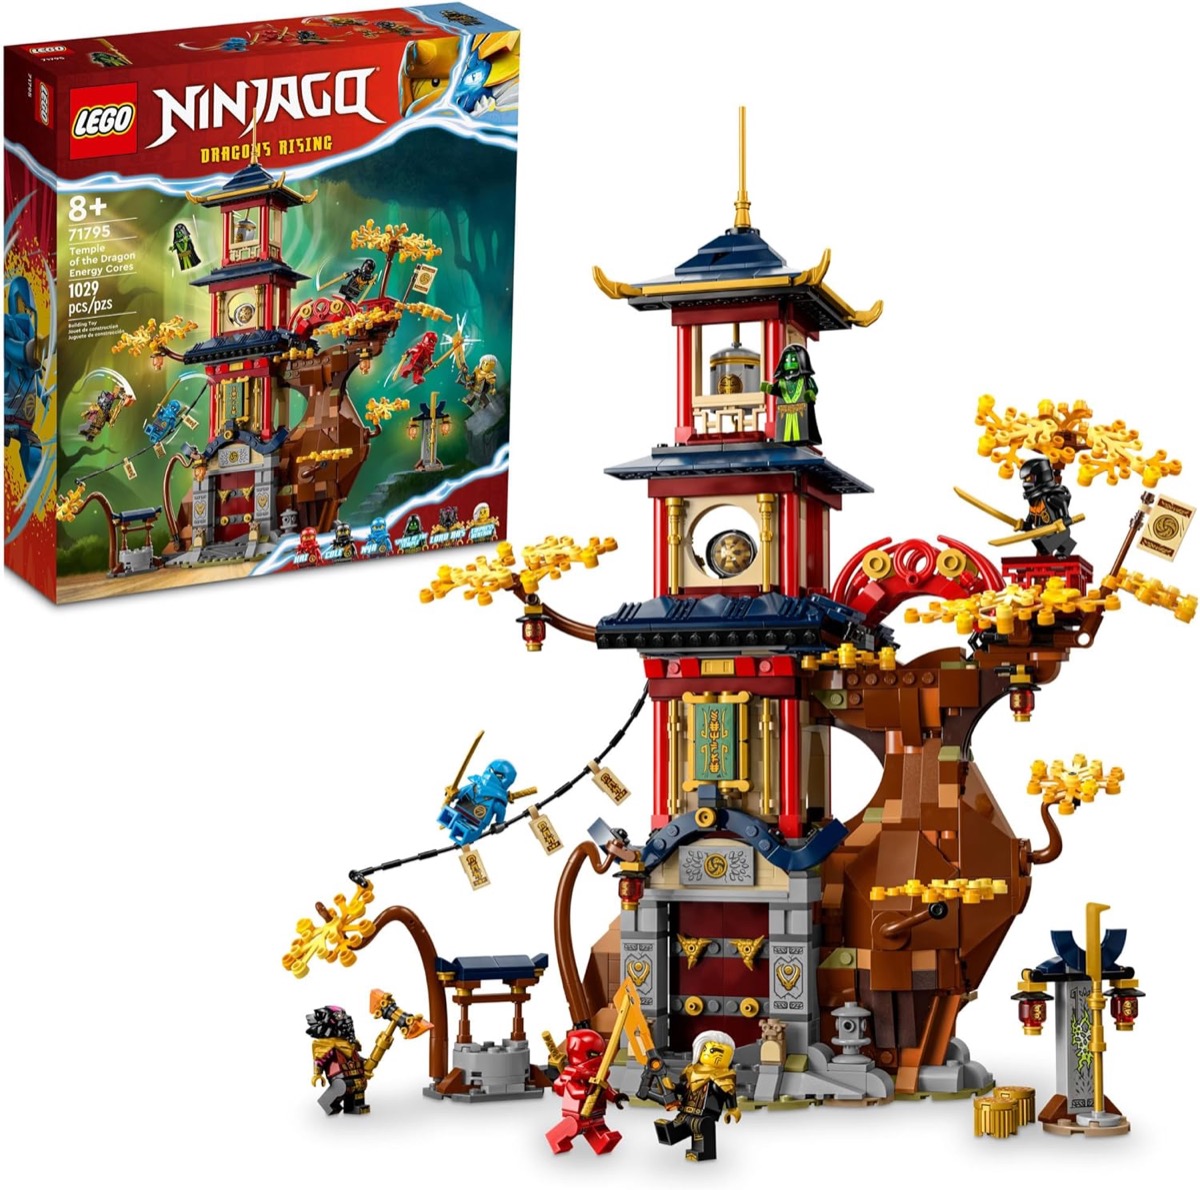 LEGO model of the Temple of The Dragon Energy Cores from "Ninjago" 